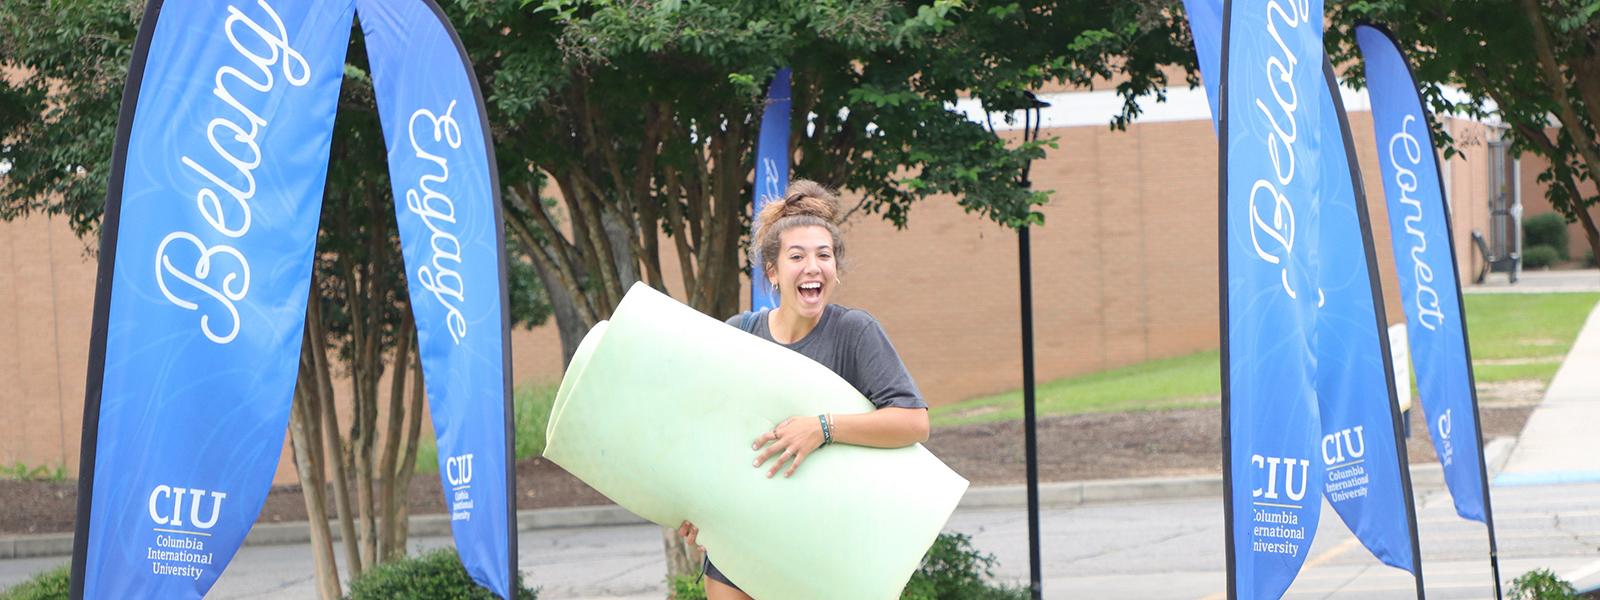 Upperclassmen lend a hand on move-in day for freshmen. (Photo by Kierston Smith) 